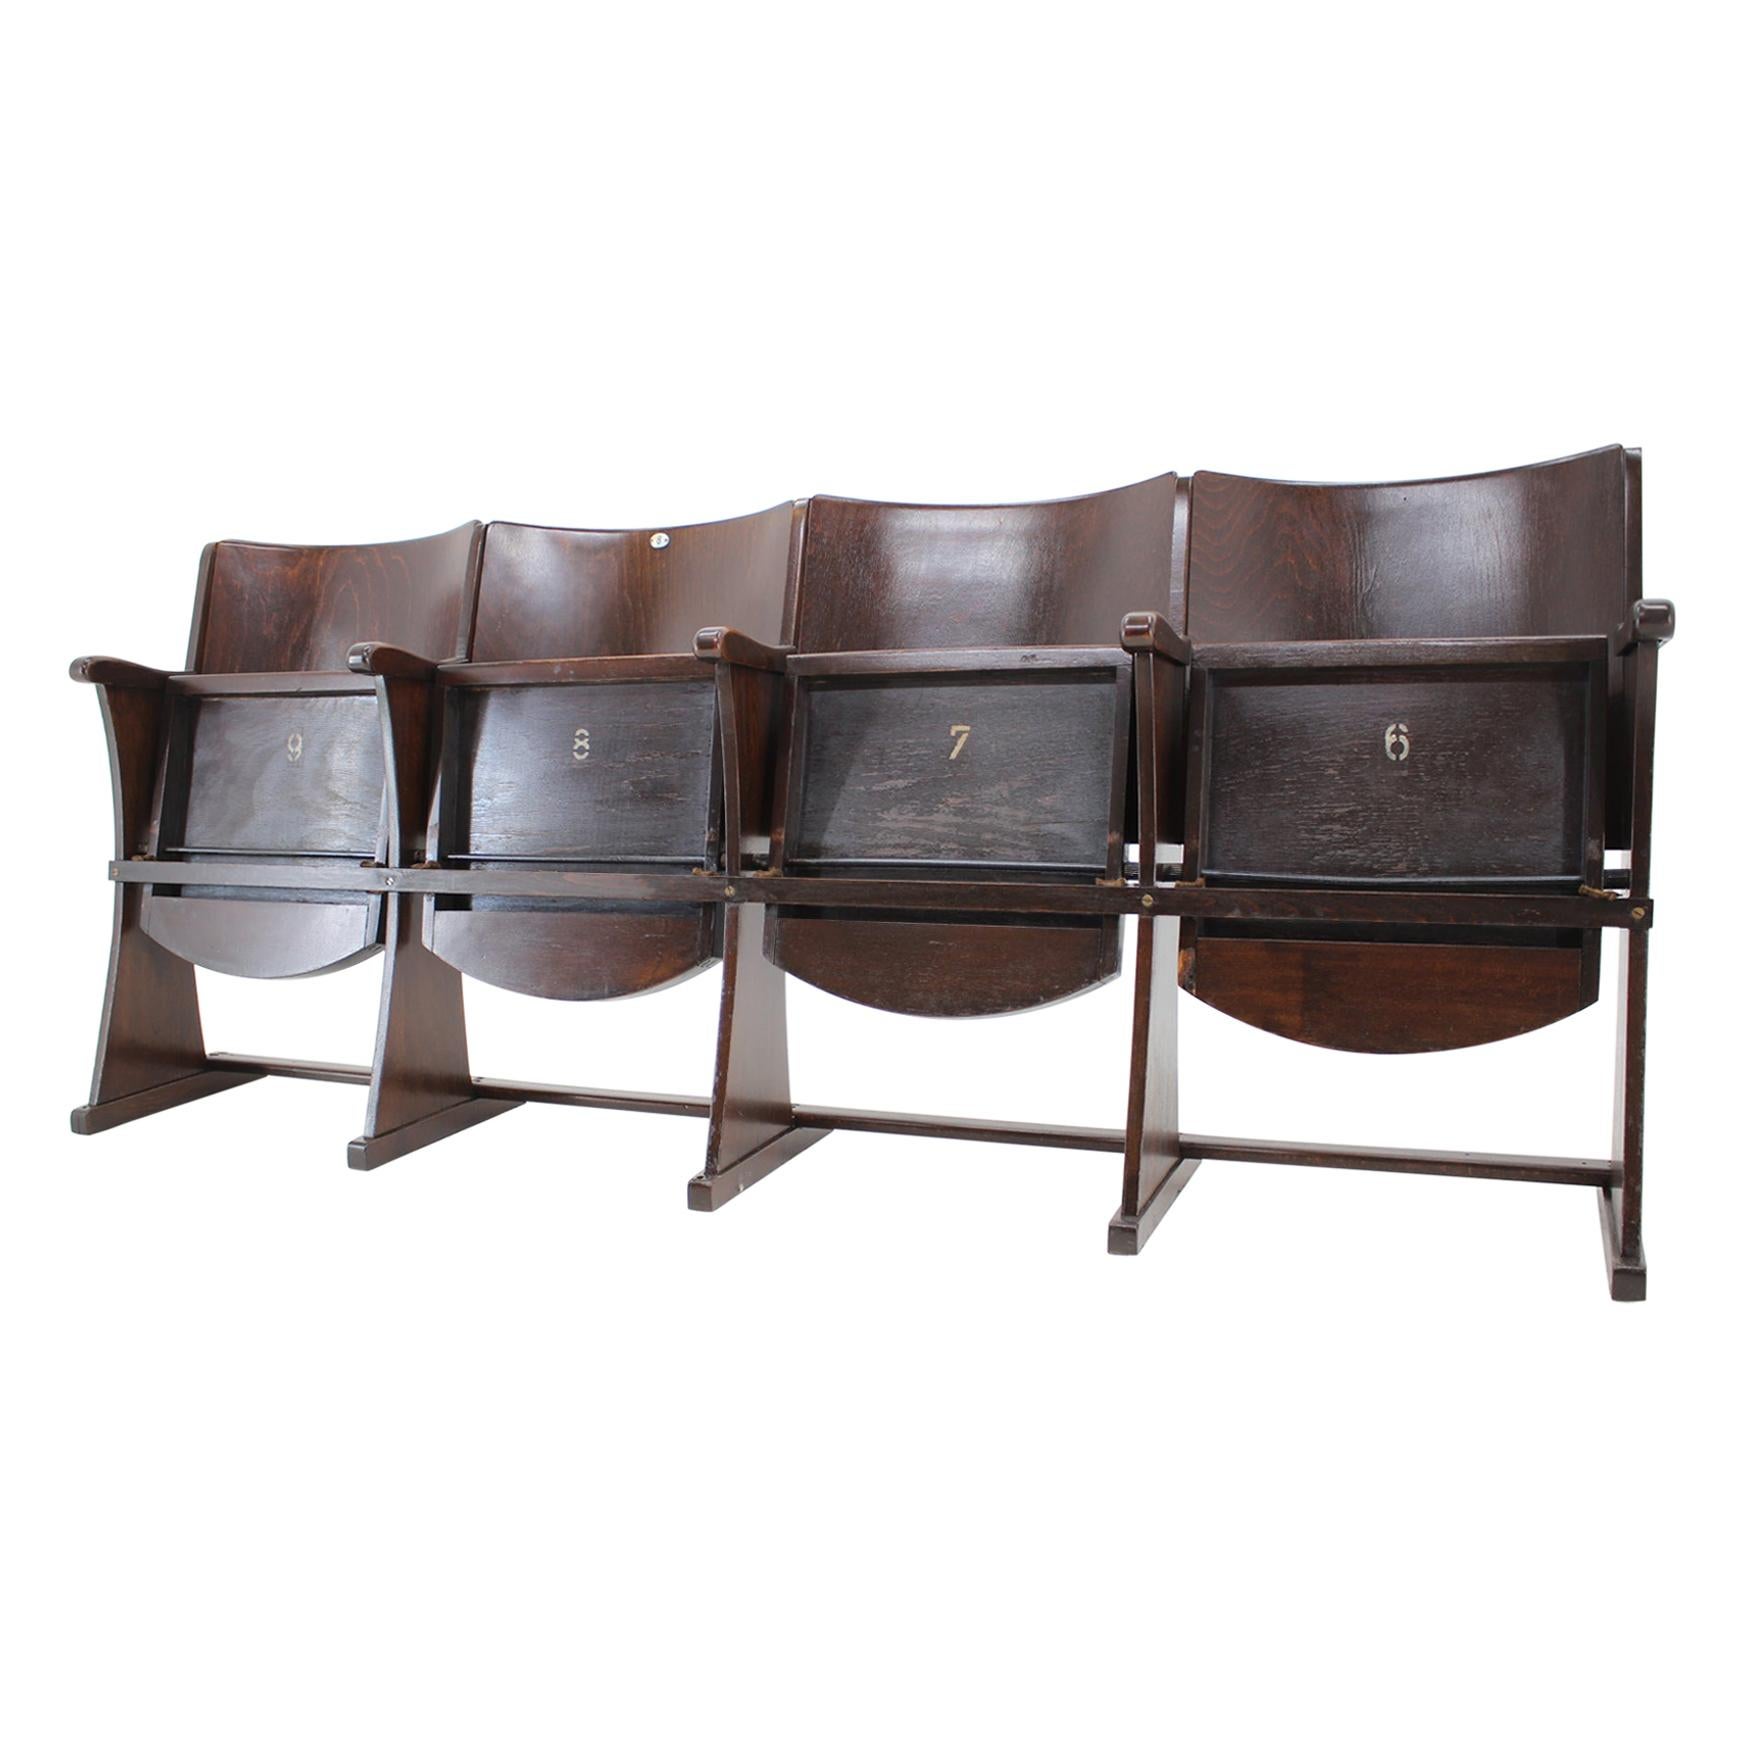 Row of Cinema Chairs / Bench by Thonet, 1940s, 'Renovated'